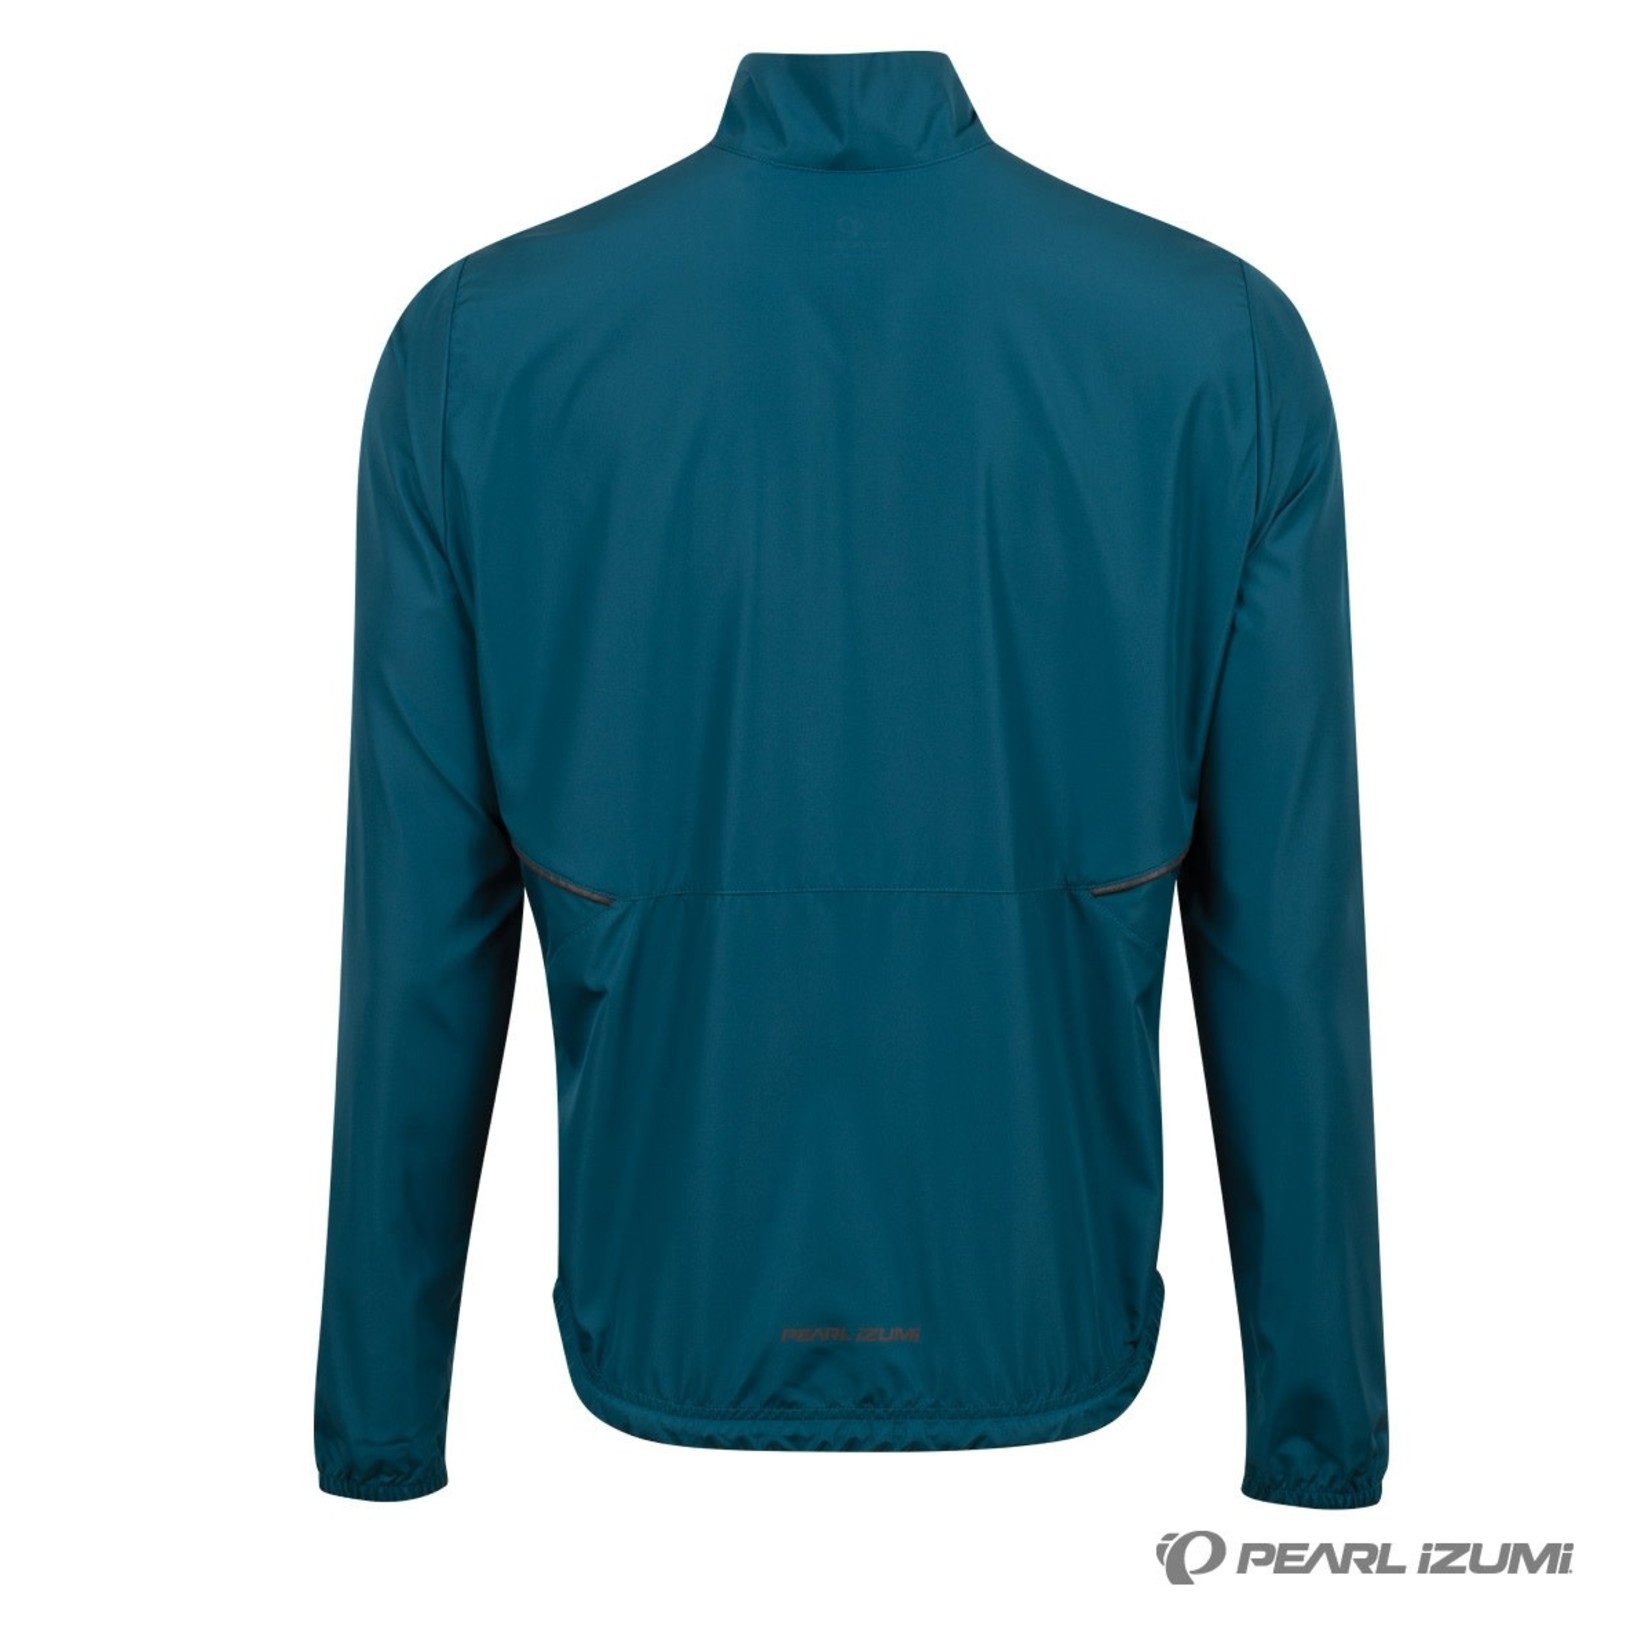 Shimano Pearl Izumi Quest Barrier 100% Recycled Material Bike Jacket - Ocean Blue